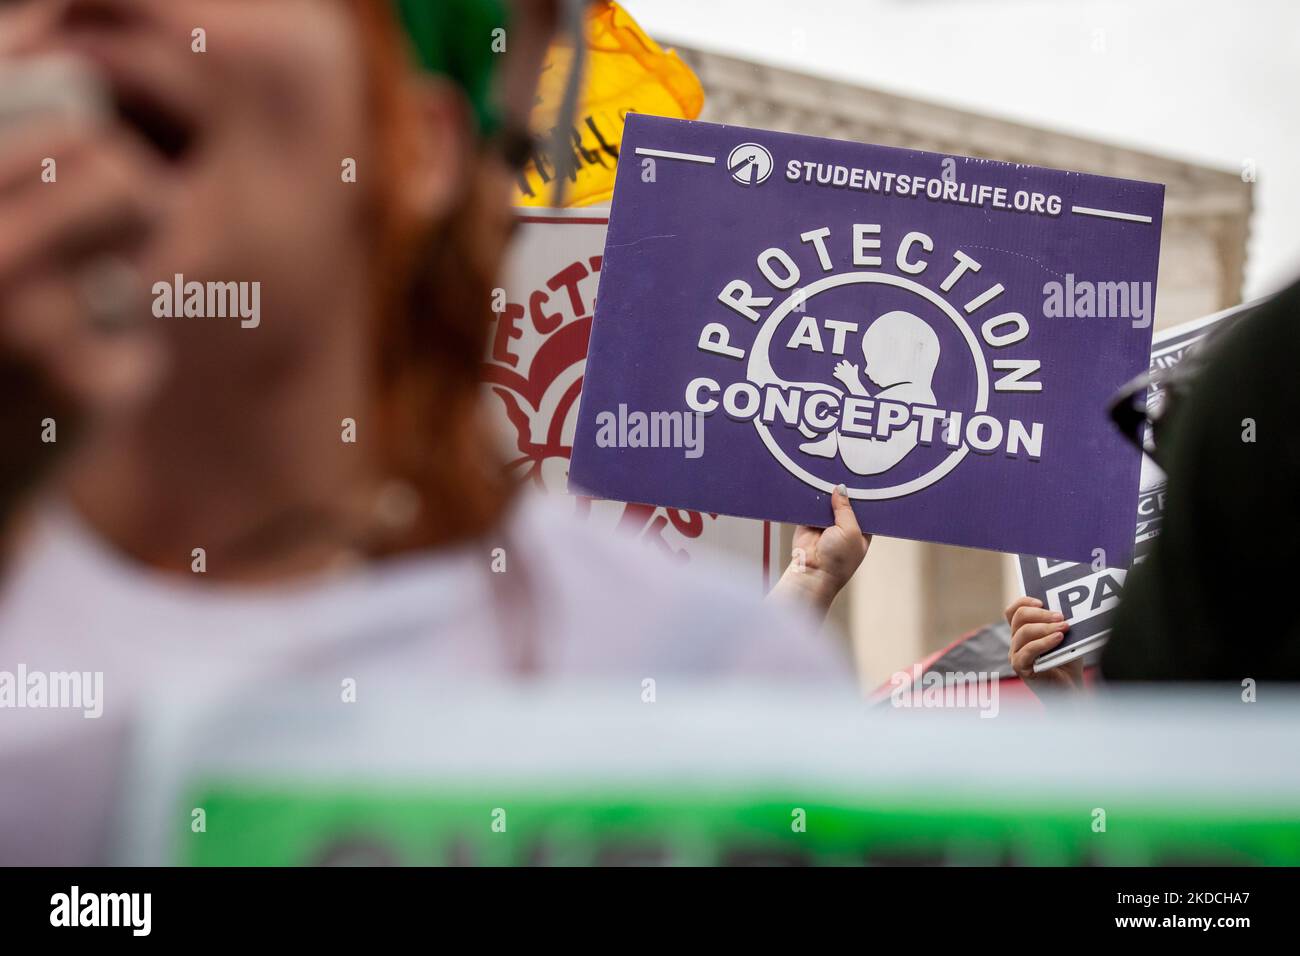 An anti-abortion sign is visible behind a pro-choice protester at the Supreme Court as demonstrators await its decision on Dobbs v. JWHO. A draft opinion leaked in May, 2022, indicating that the Court would overturn the federal right to abortion decided 49 years ago in Roe v. Wade, allowing each state to set its own laws. With the exception of Thomas, all of the conservative justices in the majority testified under oath in their confirmation hearings that they consider abortion access 'settled law.' (Photo by Allison Bailey/NurPhoto) Stock Photo